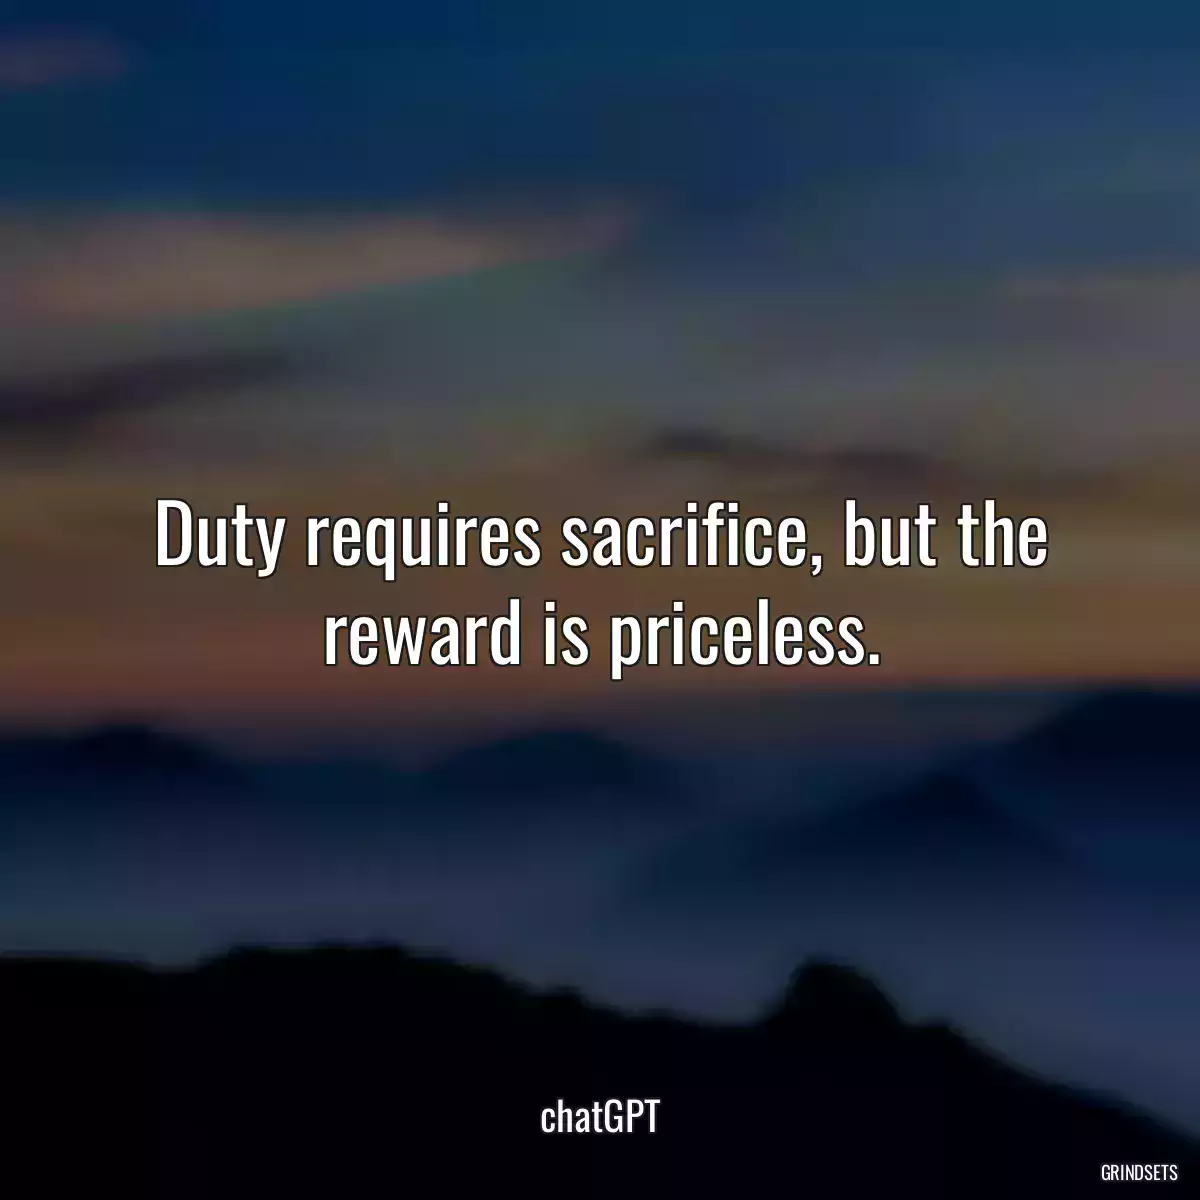 Duty requires sacrifice, but the reward is priceless.